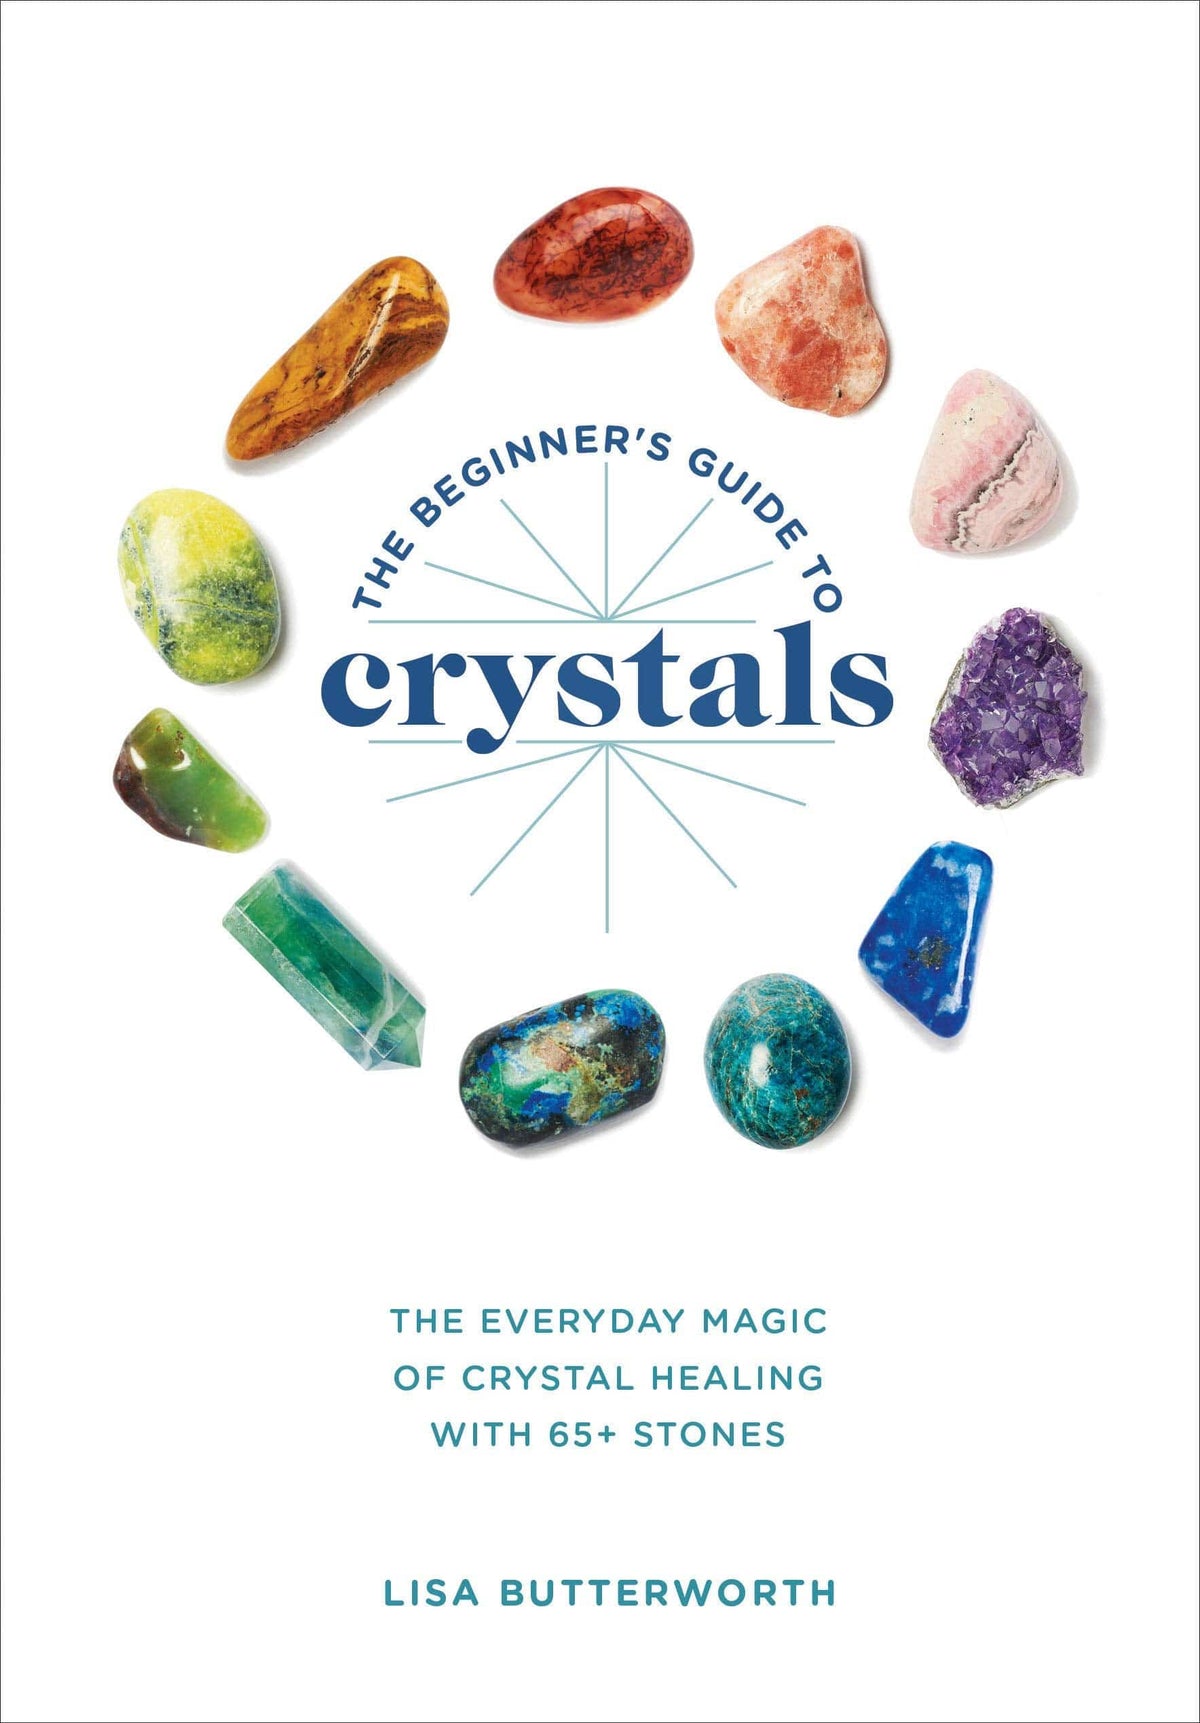 Beginner's Guide to Crystals by Lisa Butterworth - Third Eye